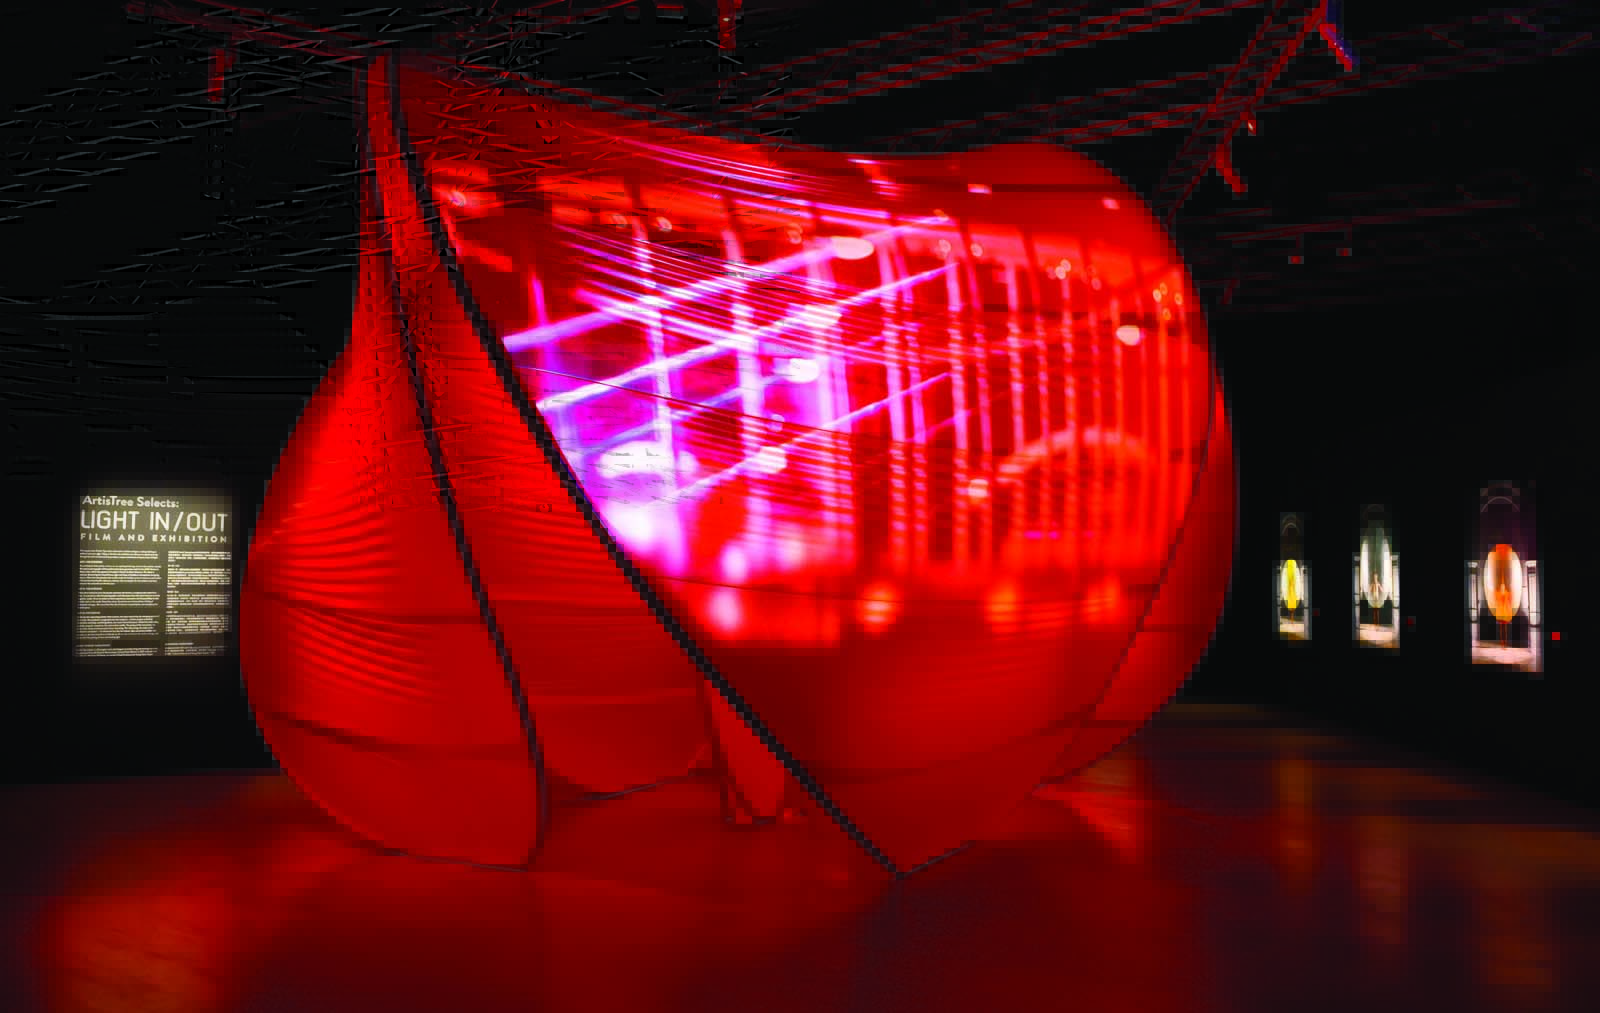 ArtisTree Selects Light In Out Film and Exhibition installation